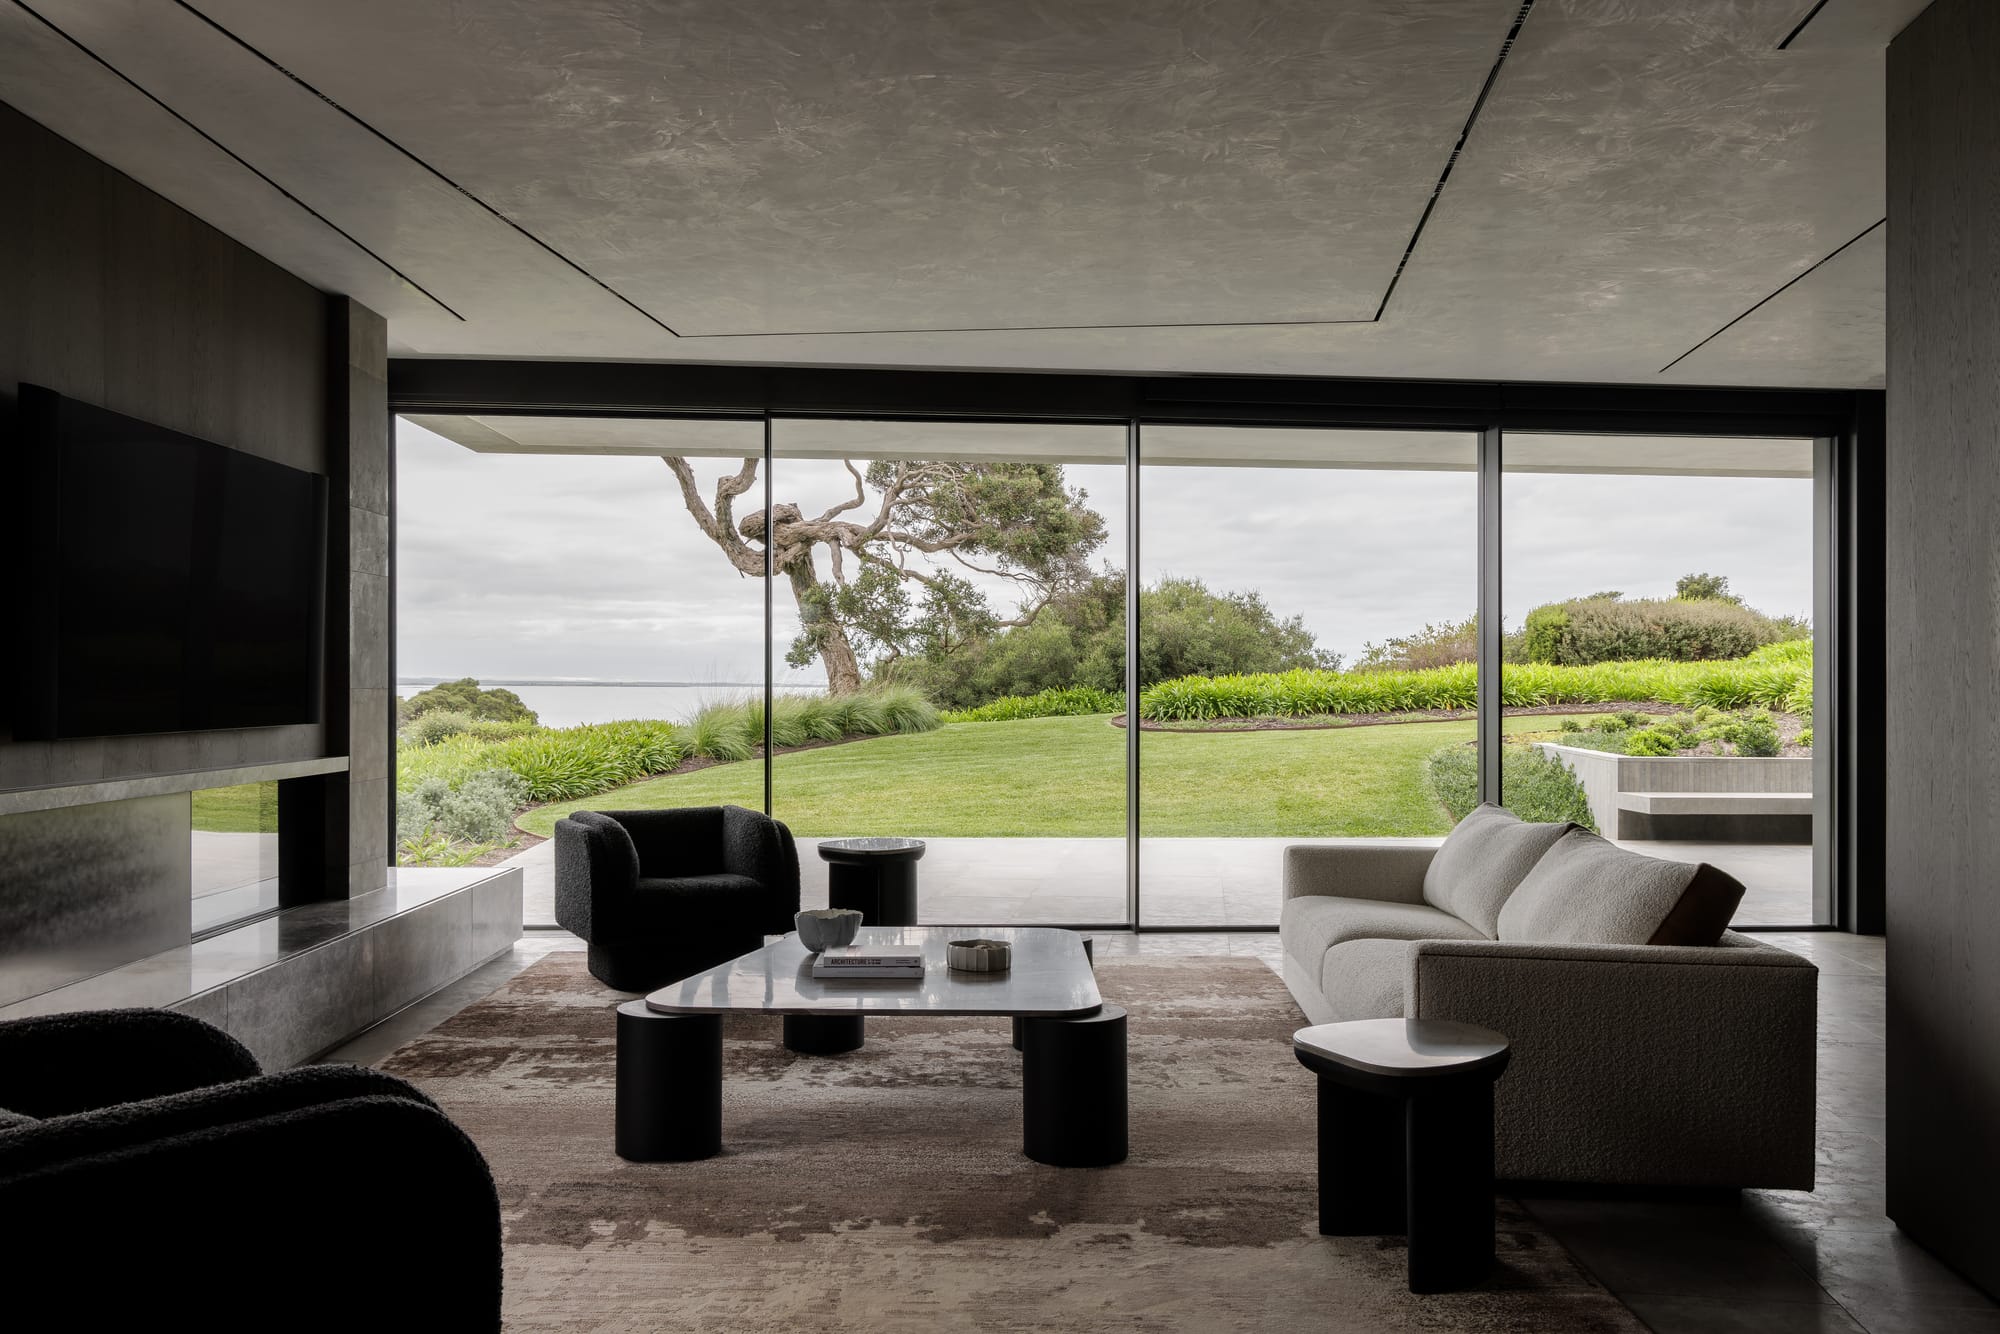 Cliff House by Finnis Architects. Photography by Timothy Kaye. Living space in front of floor-to-ceiling windows overlooking grass garden and ocean. 